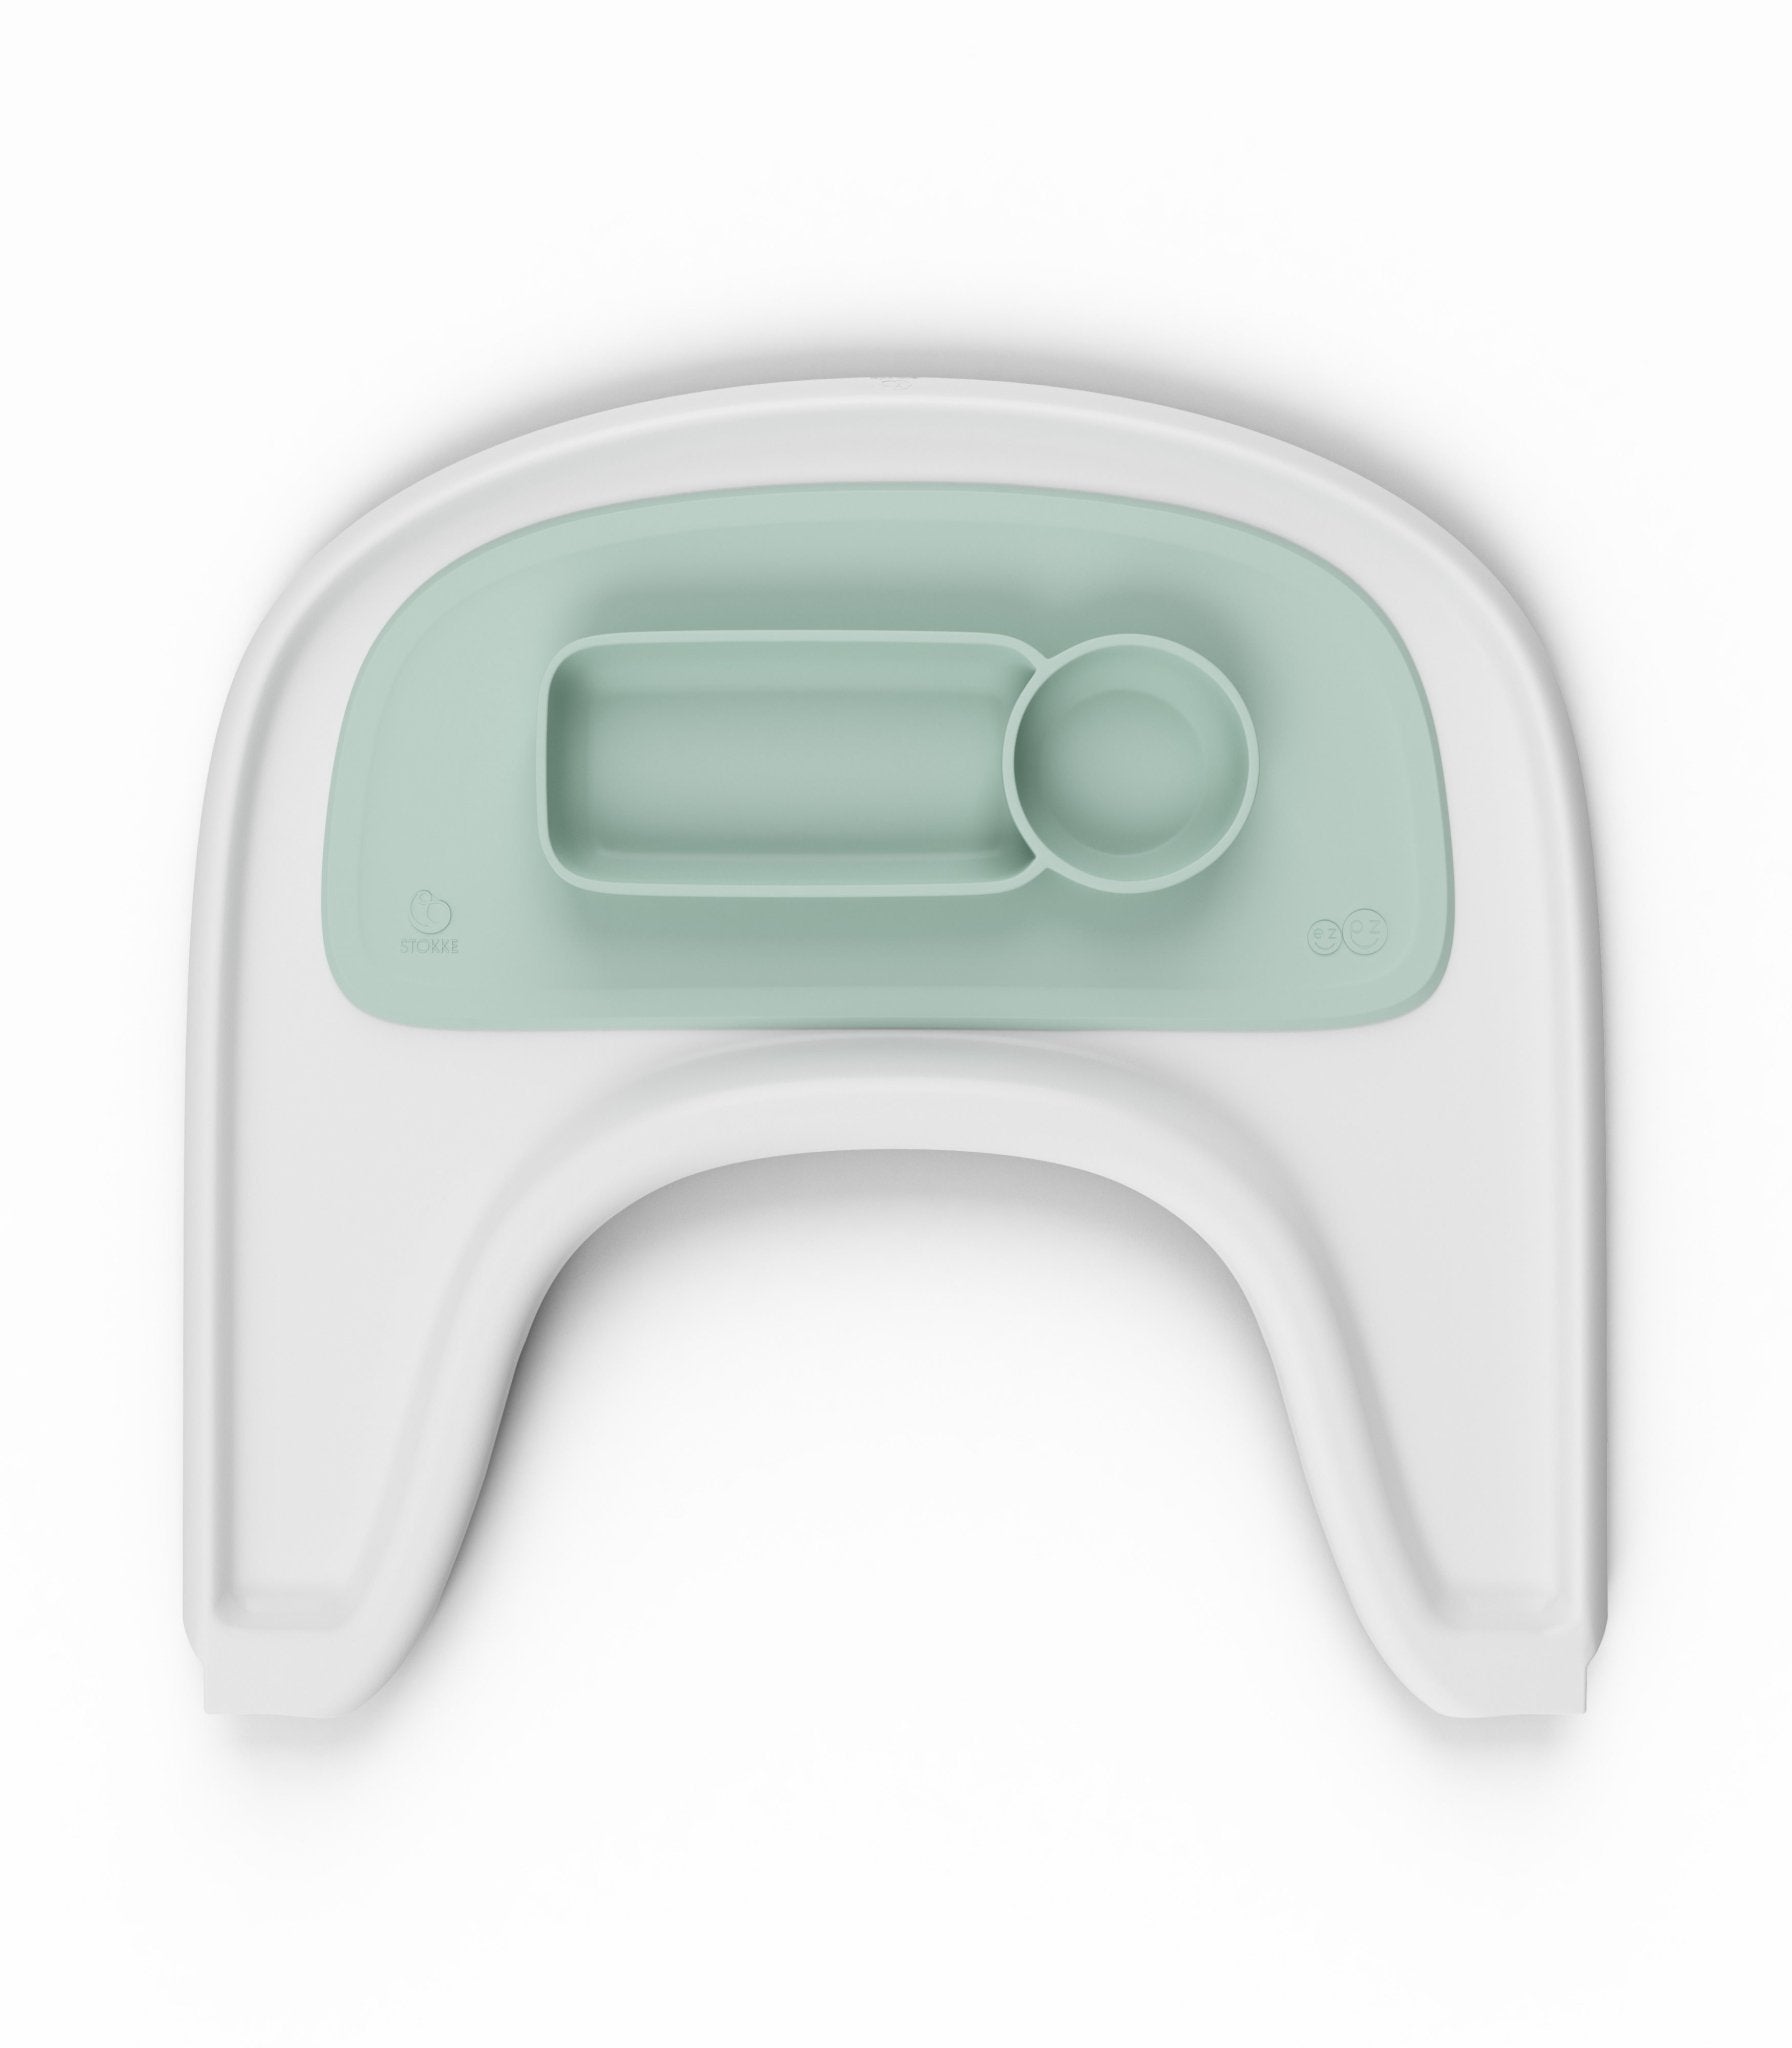 Stokke EZPZ Silicone Placemat for Stokke Tray Tripp Trapp - ANB Baby -$20 - $50